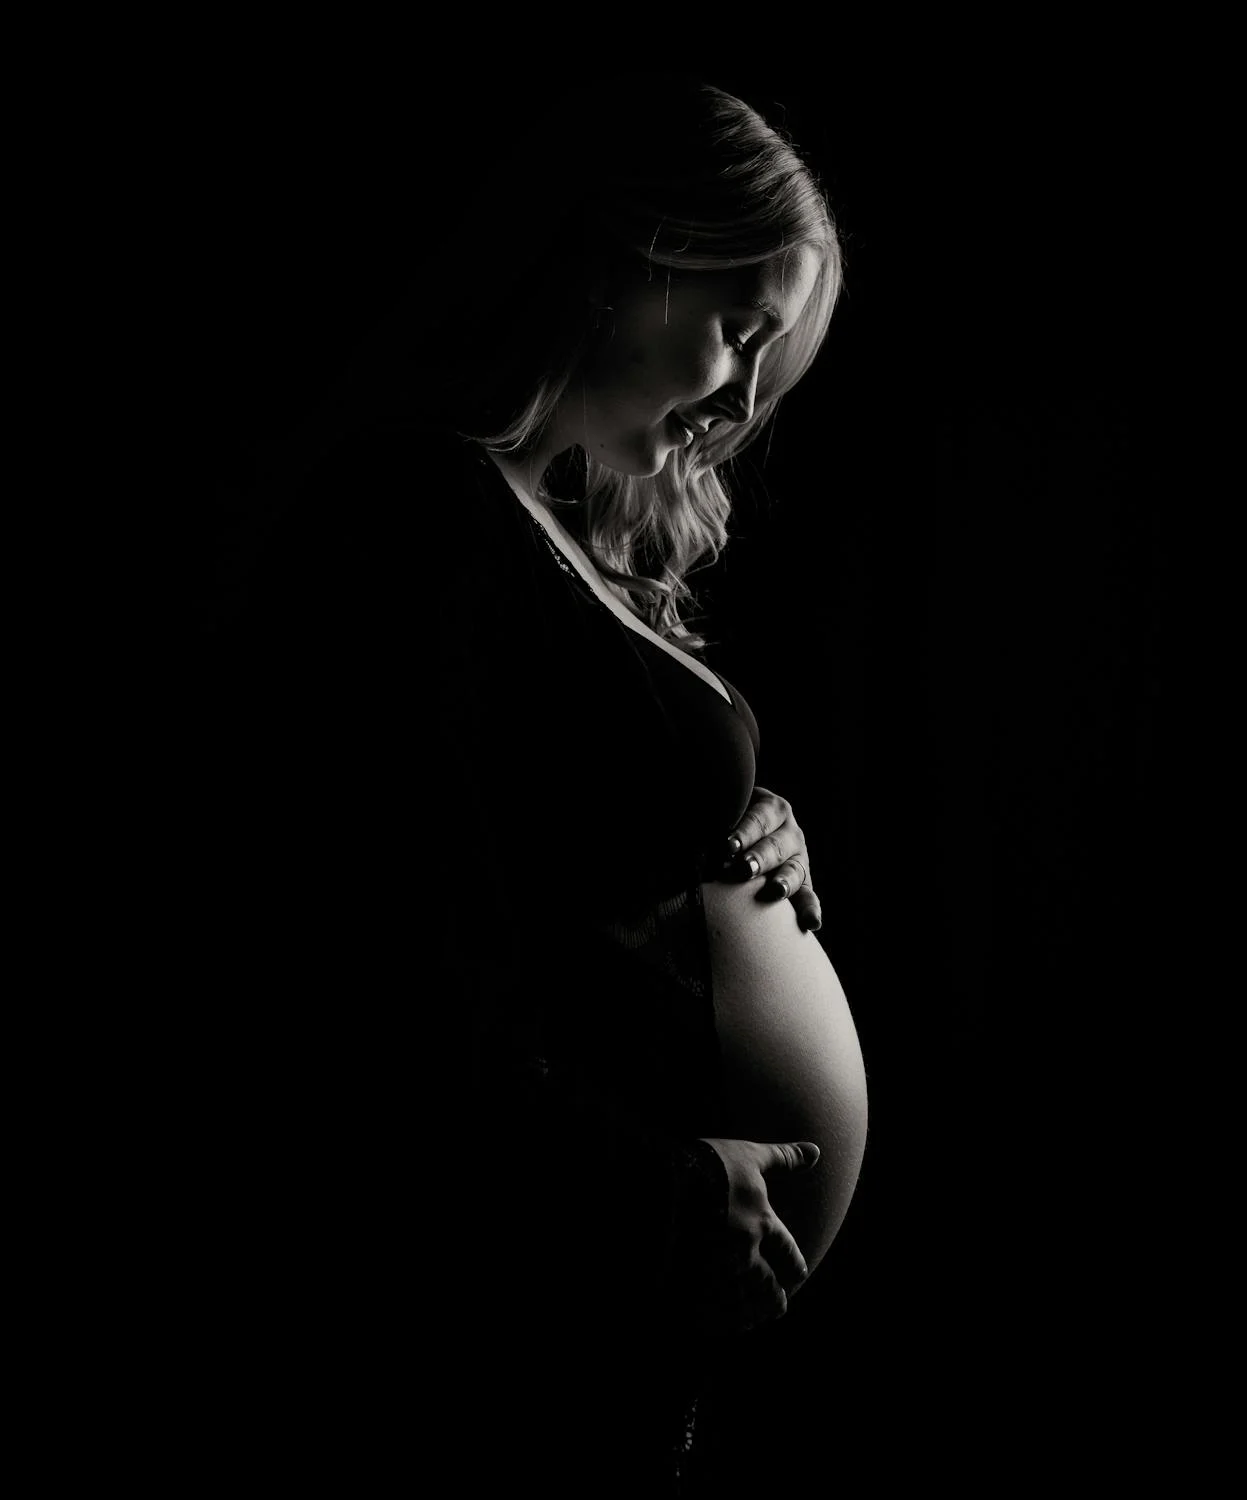 A silhouette of a pregnant woman circling her baby bump | Source: Pexels